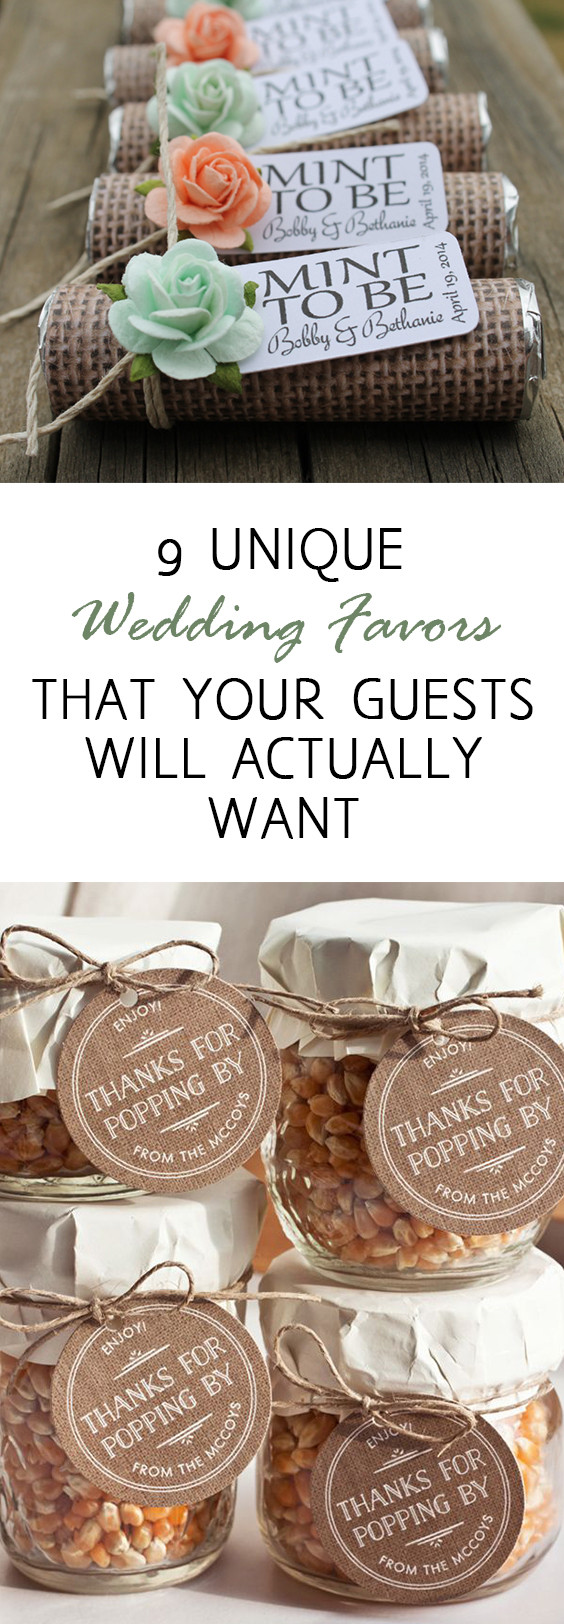 DIY Wedding Favour Ideas
 9 Unique Wedding Favors that Your Guests Will Actually